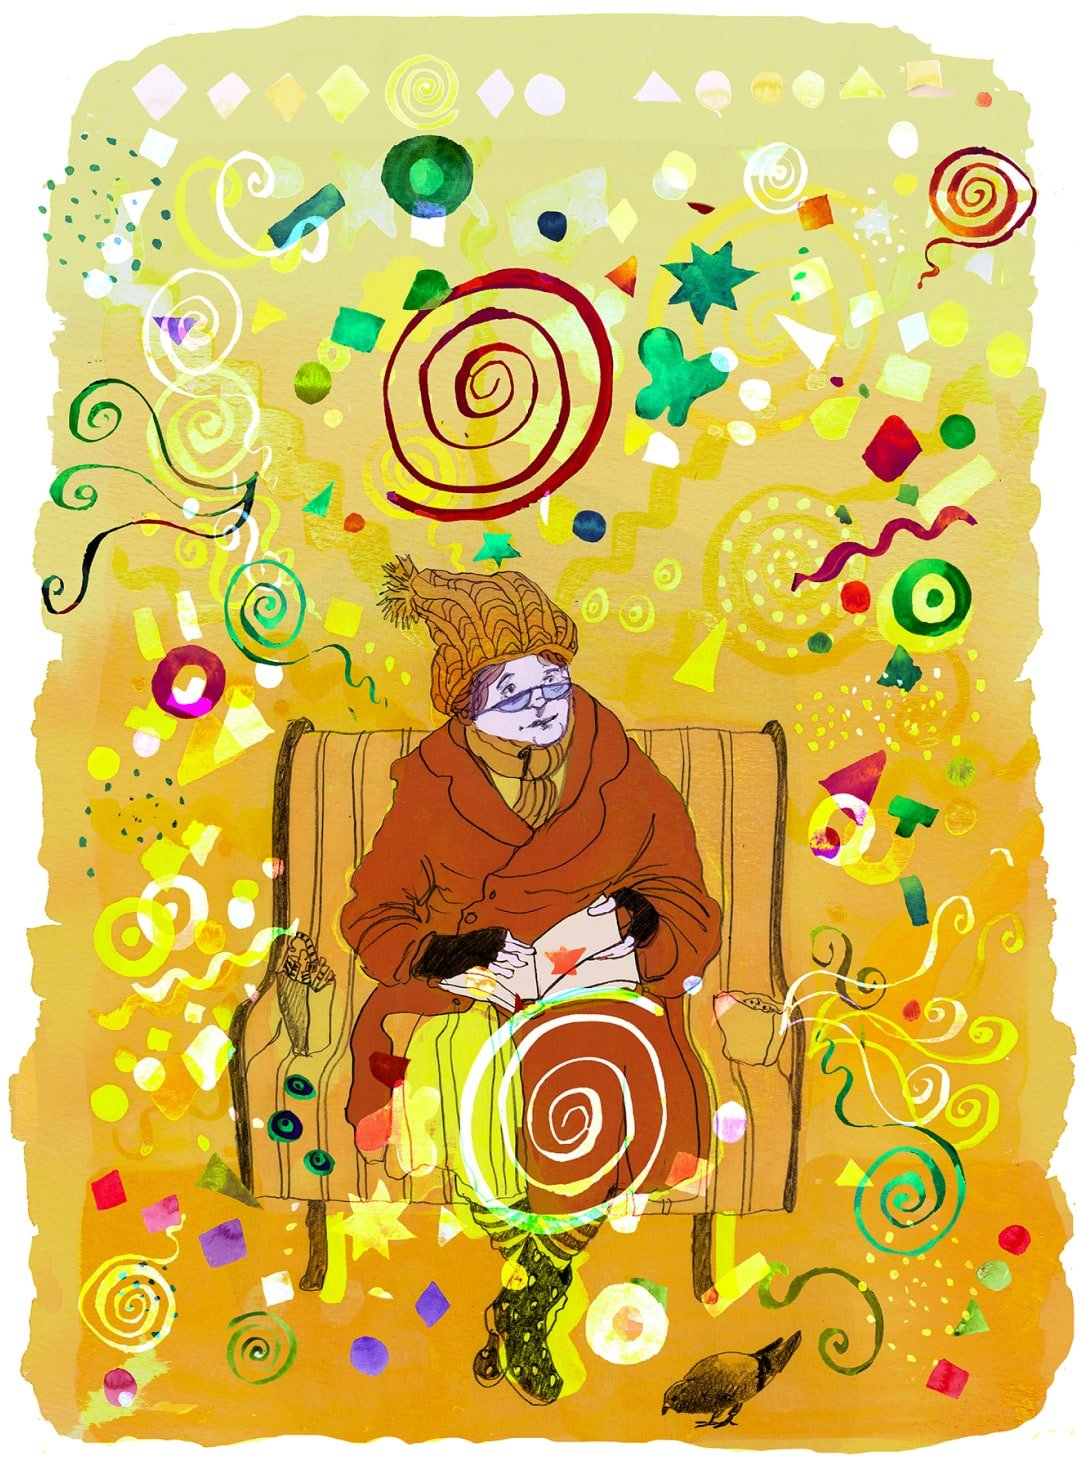 An elderly woman sits on a bench, reading. She is wearing a bright orange coat, a knitted wooly hat and gloves. She is surrounded by sirls and stars of all colours. A pigeon pecks at her feet.